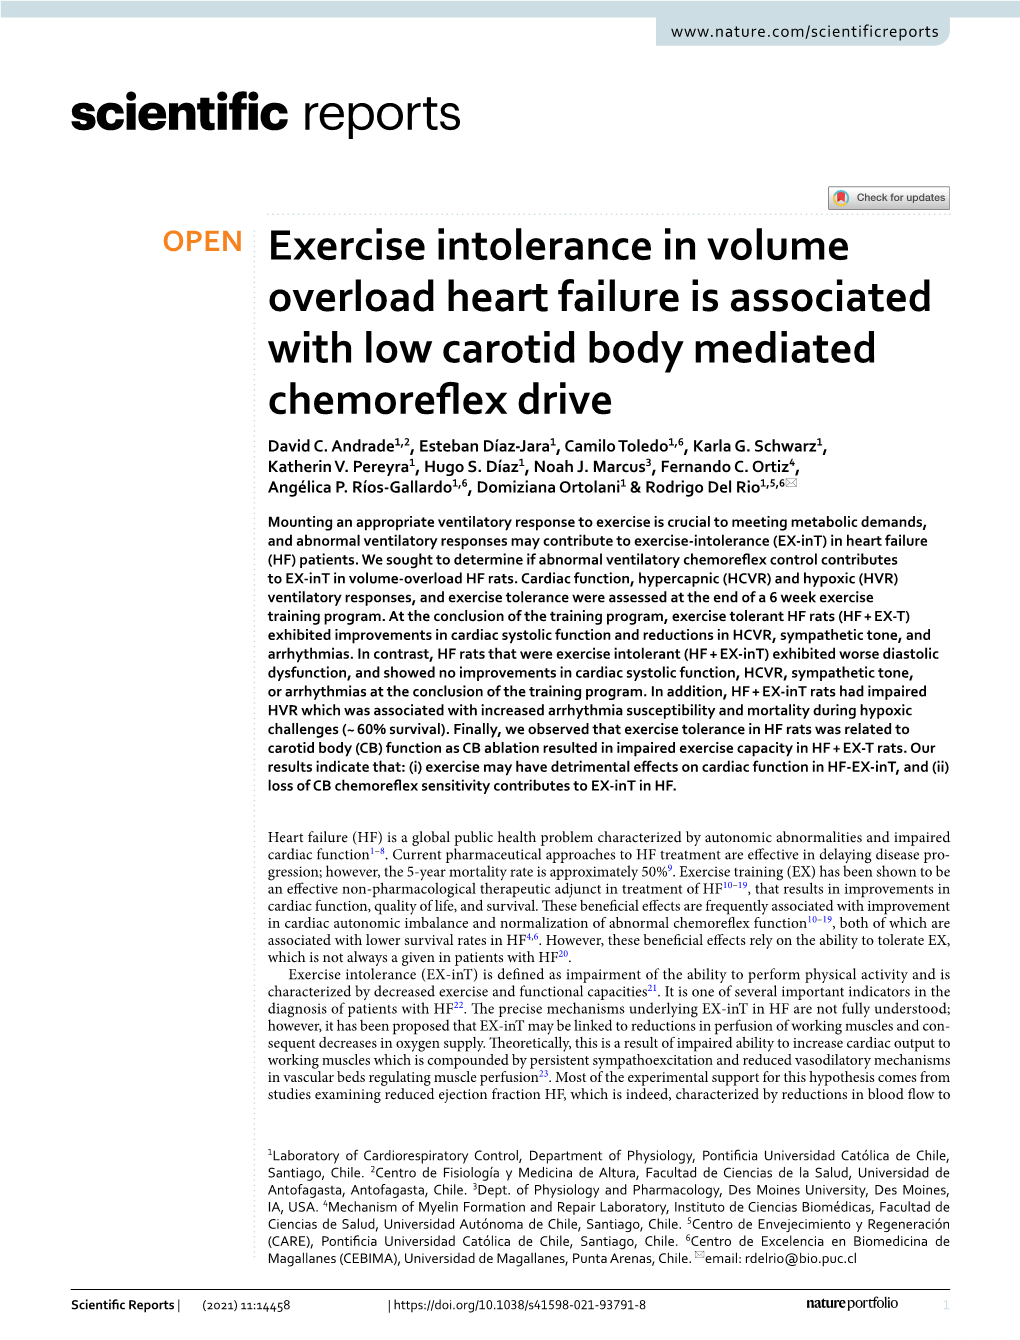 Exercise Intolerance in Volume Overload Heart Failure Is Associated with Low Carotid Body Mediated Chemorefex Drive David C